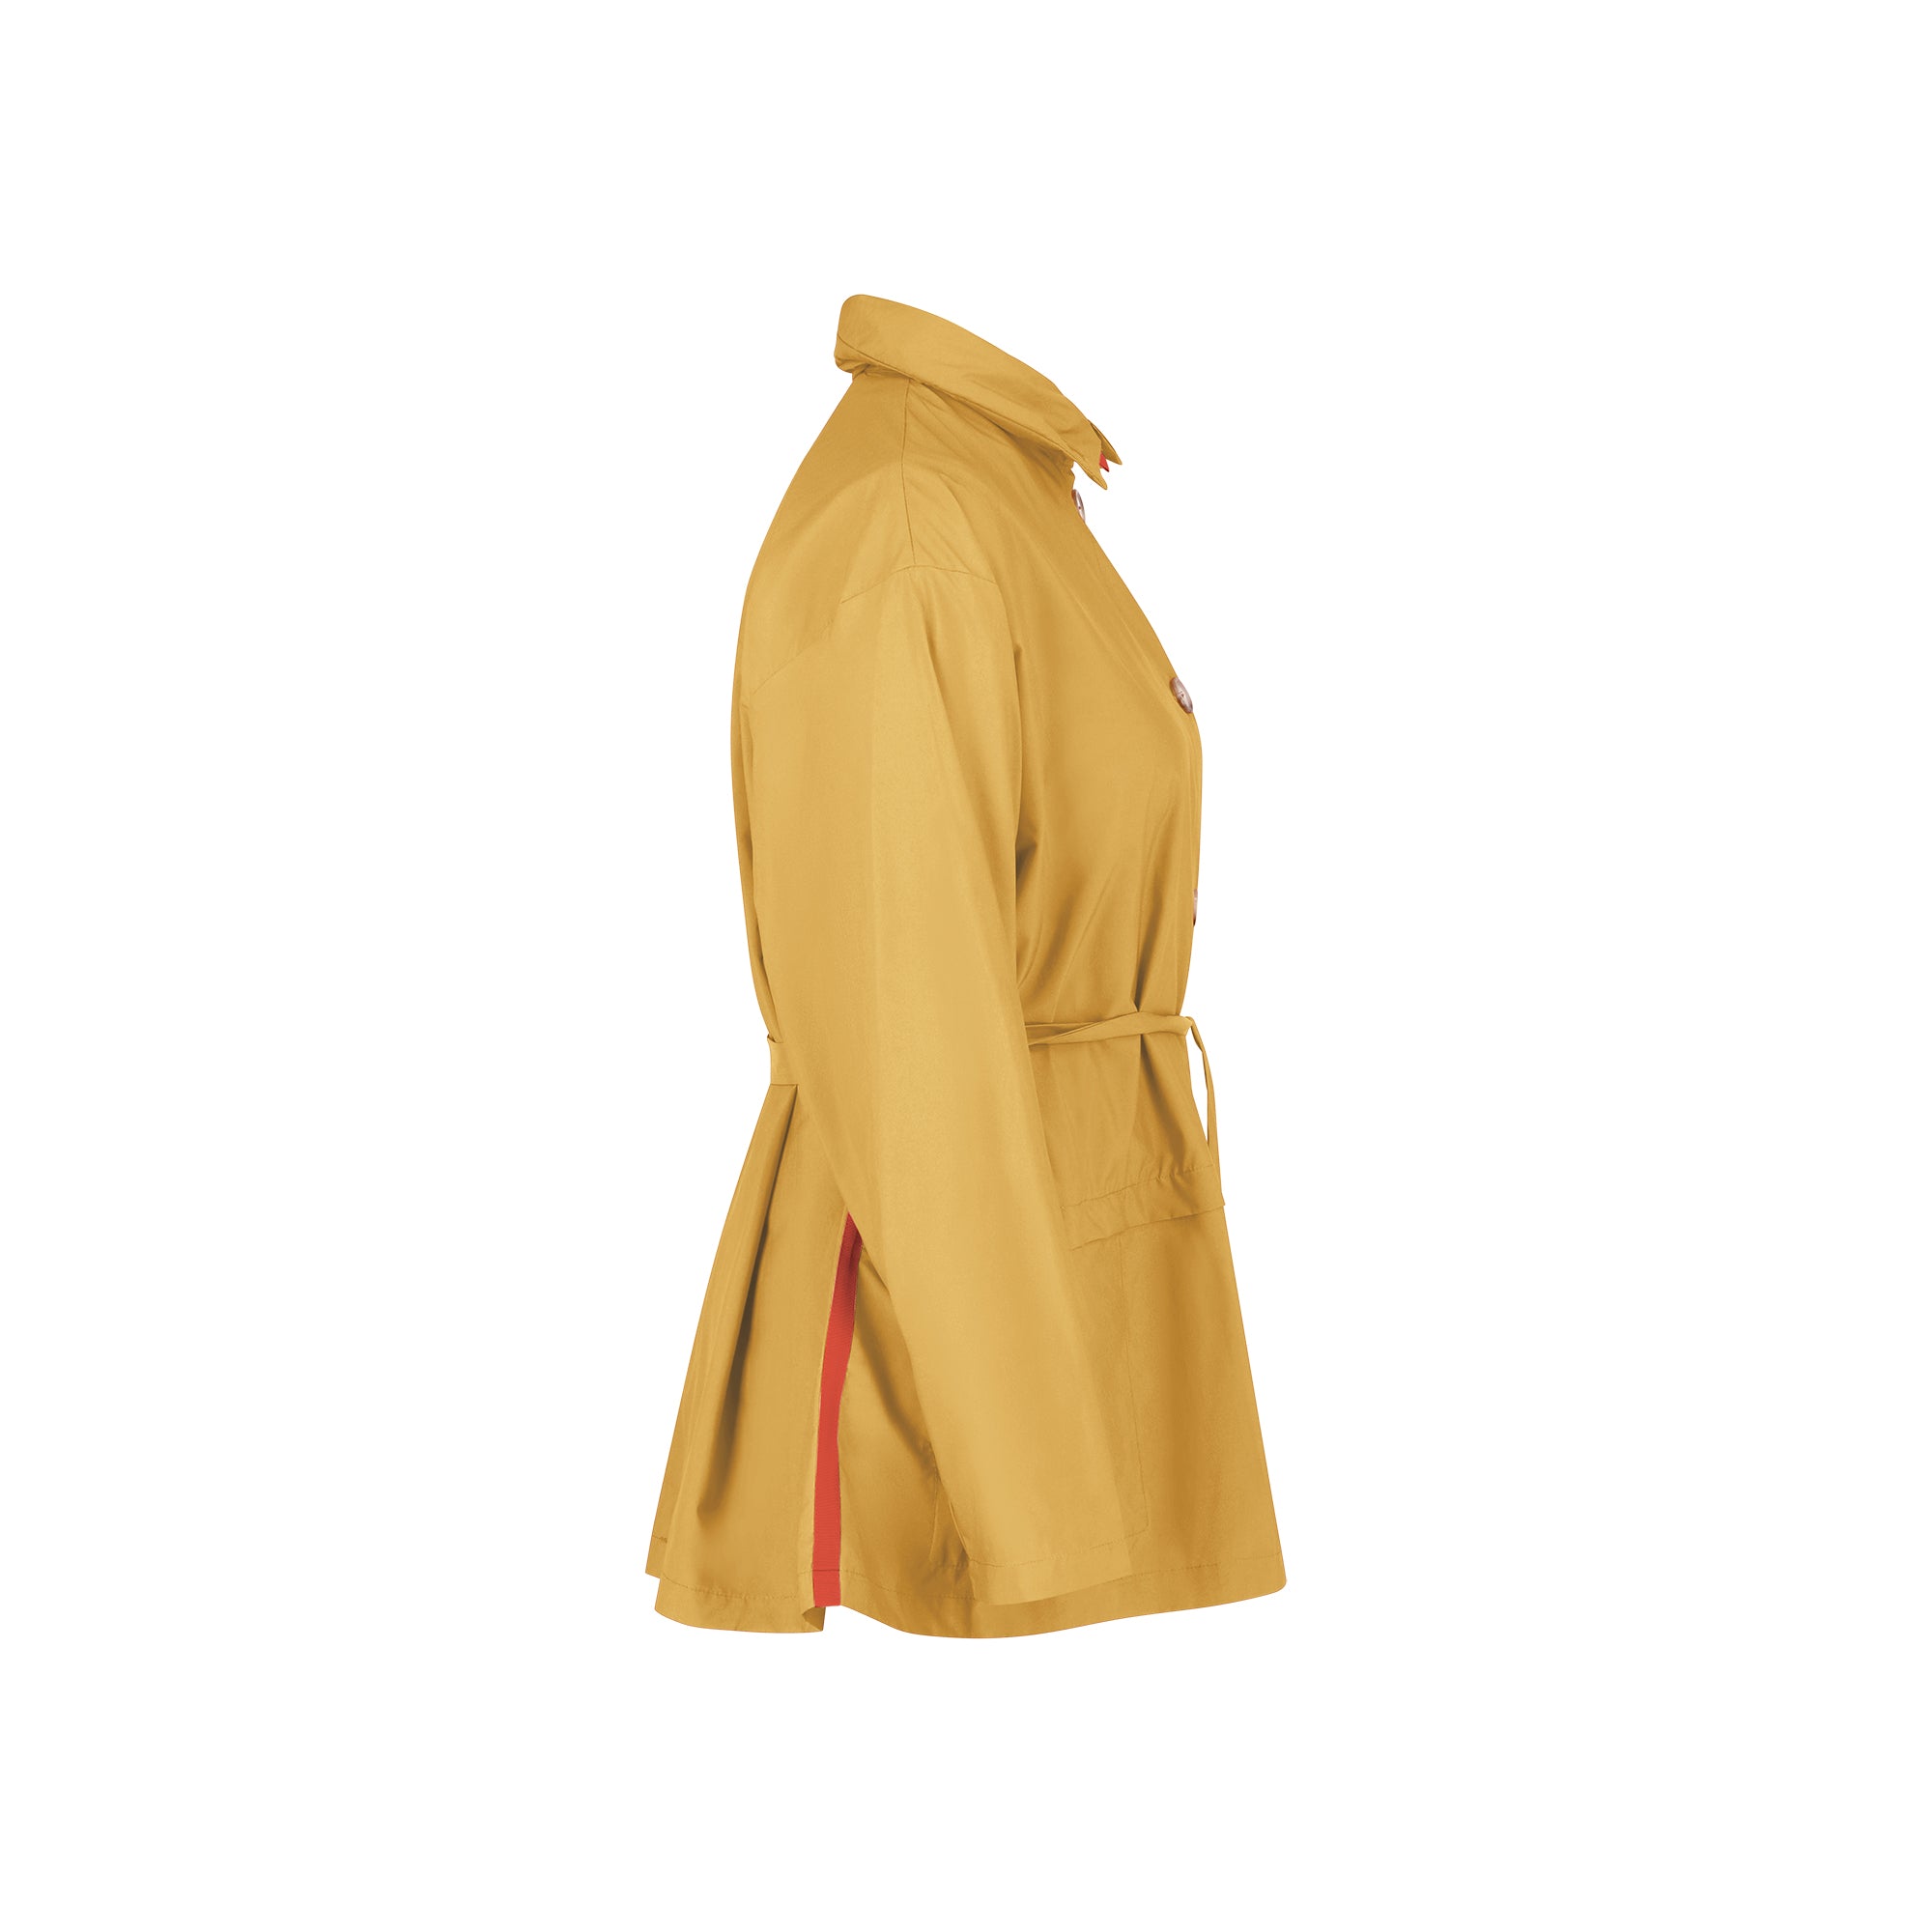 Bise raincoat - Curry color - side view